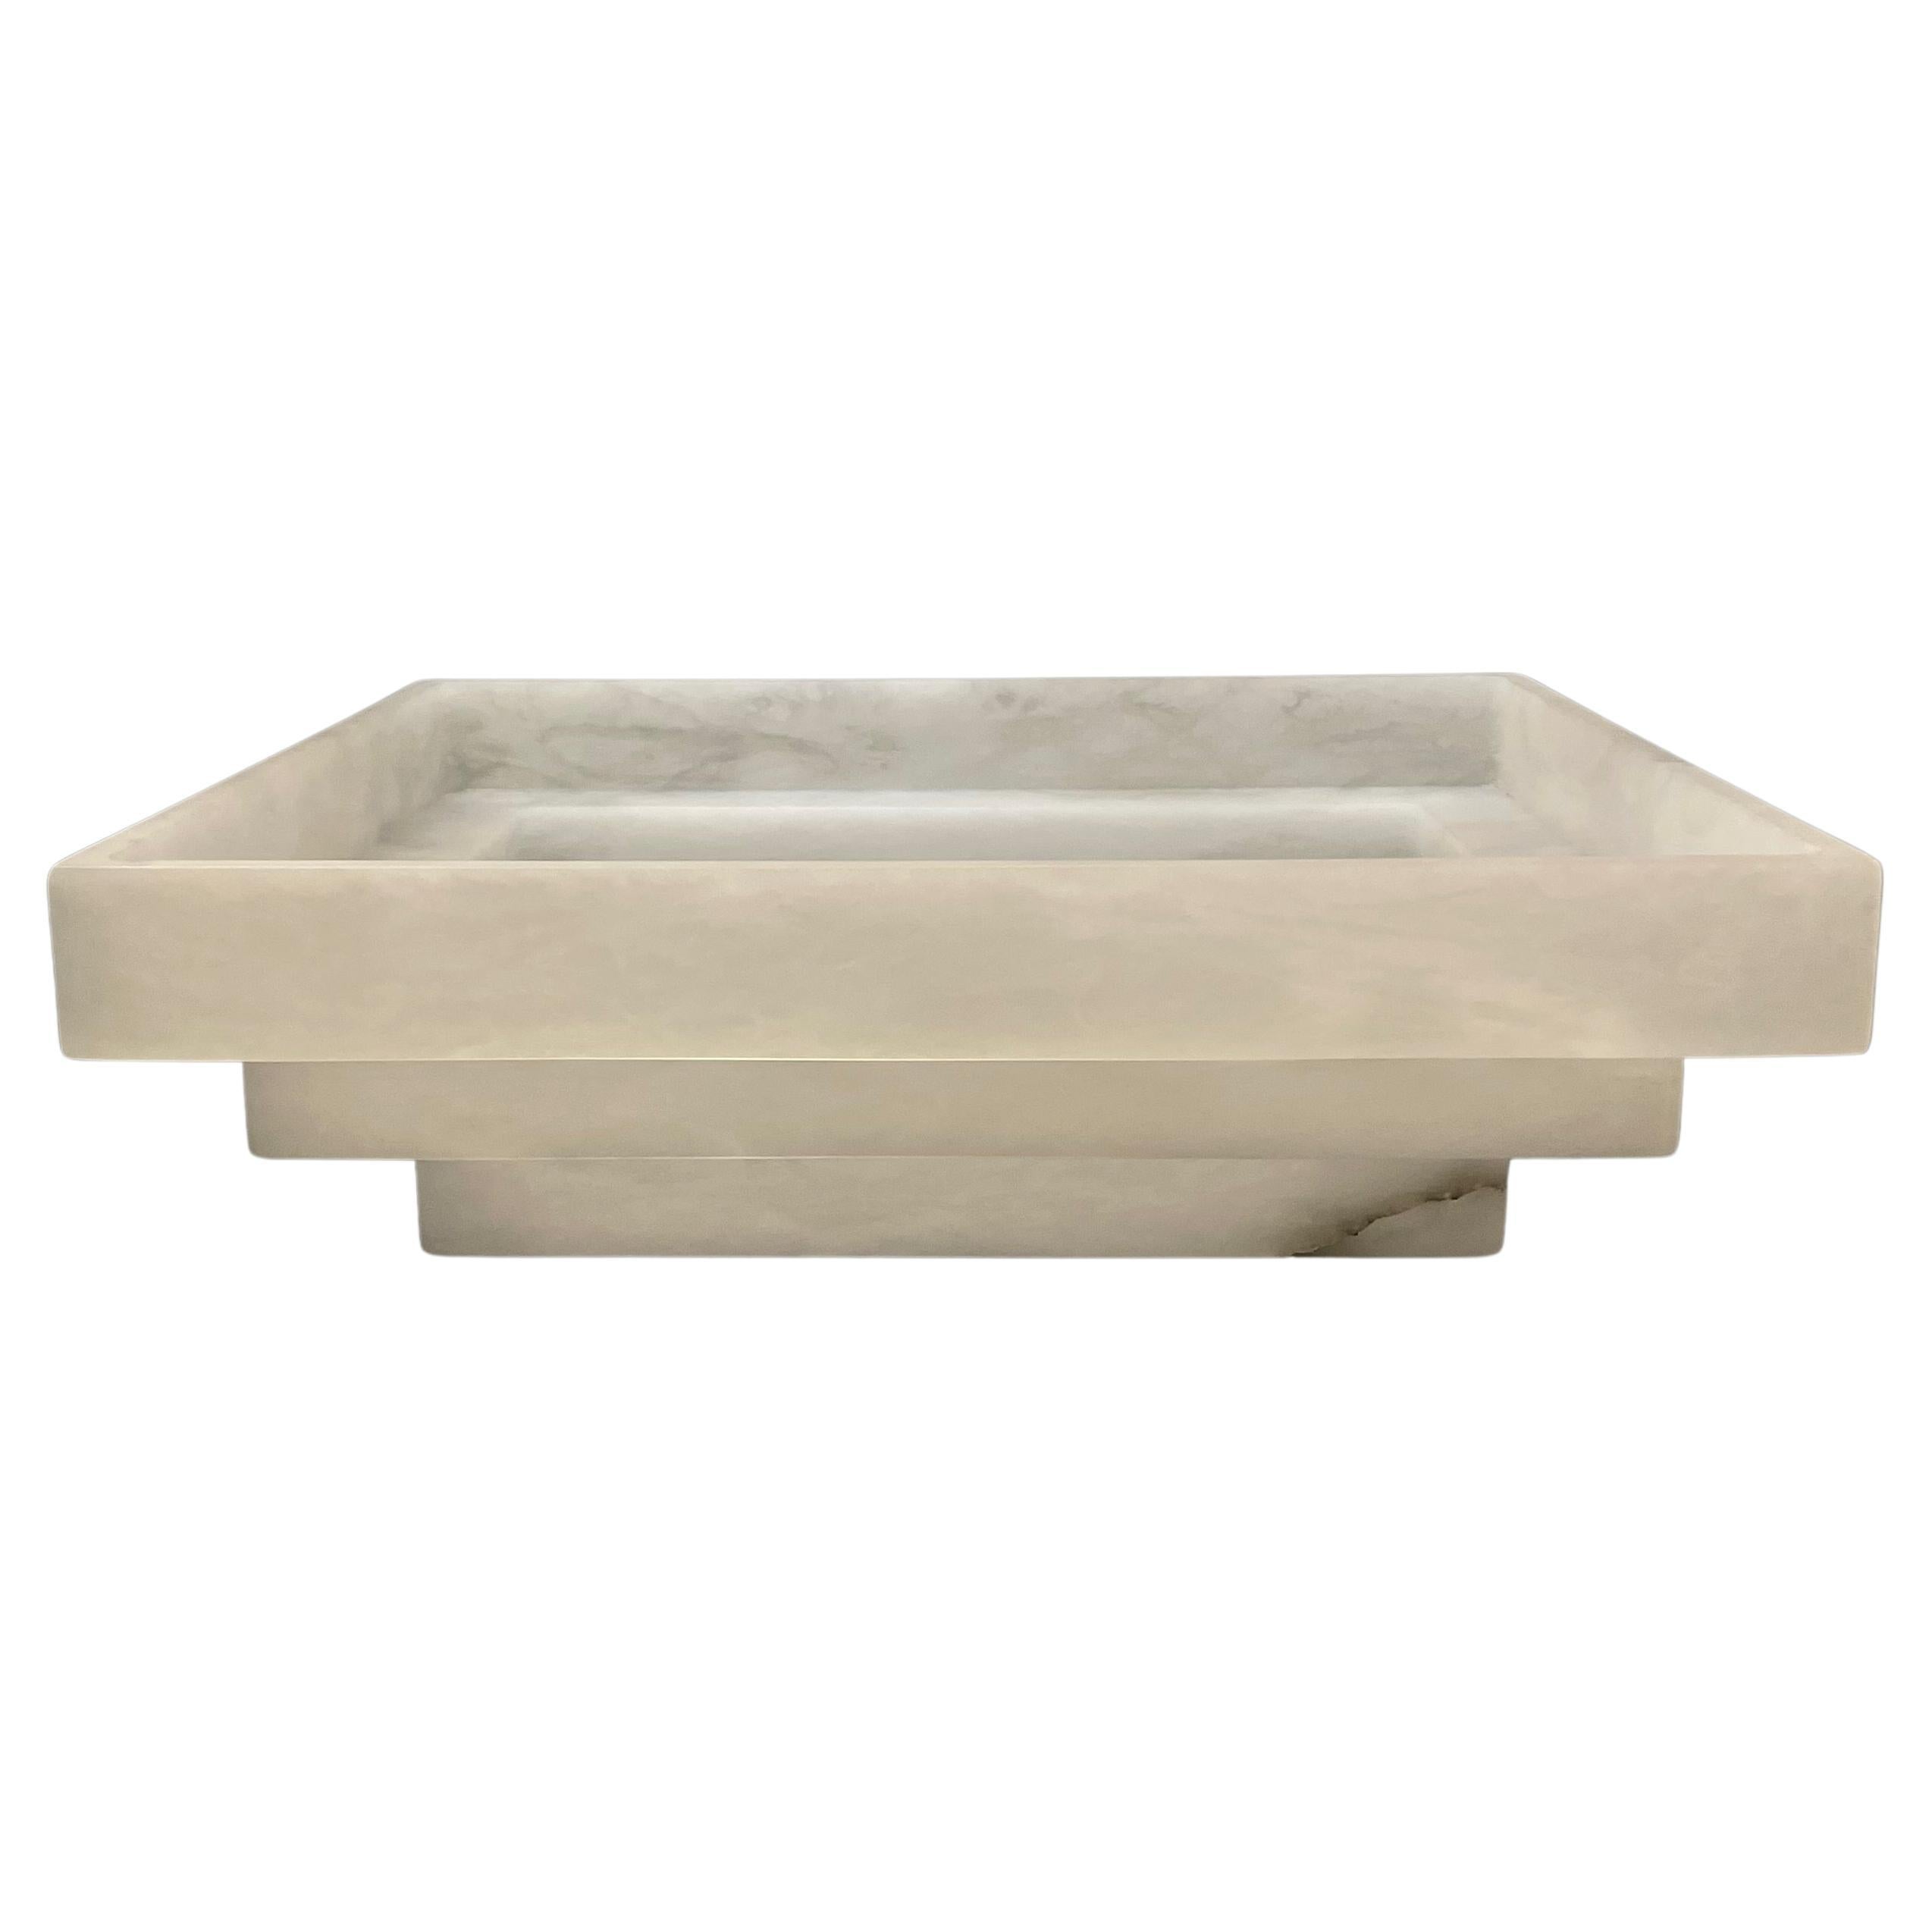 White Alabaster Square Shaped Three Tier Bowl, Italy, Contemporary For Sale